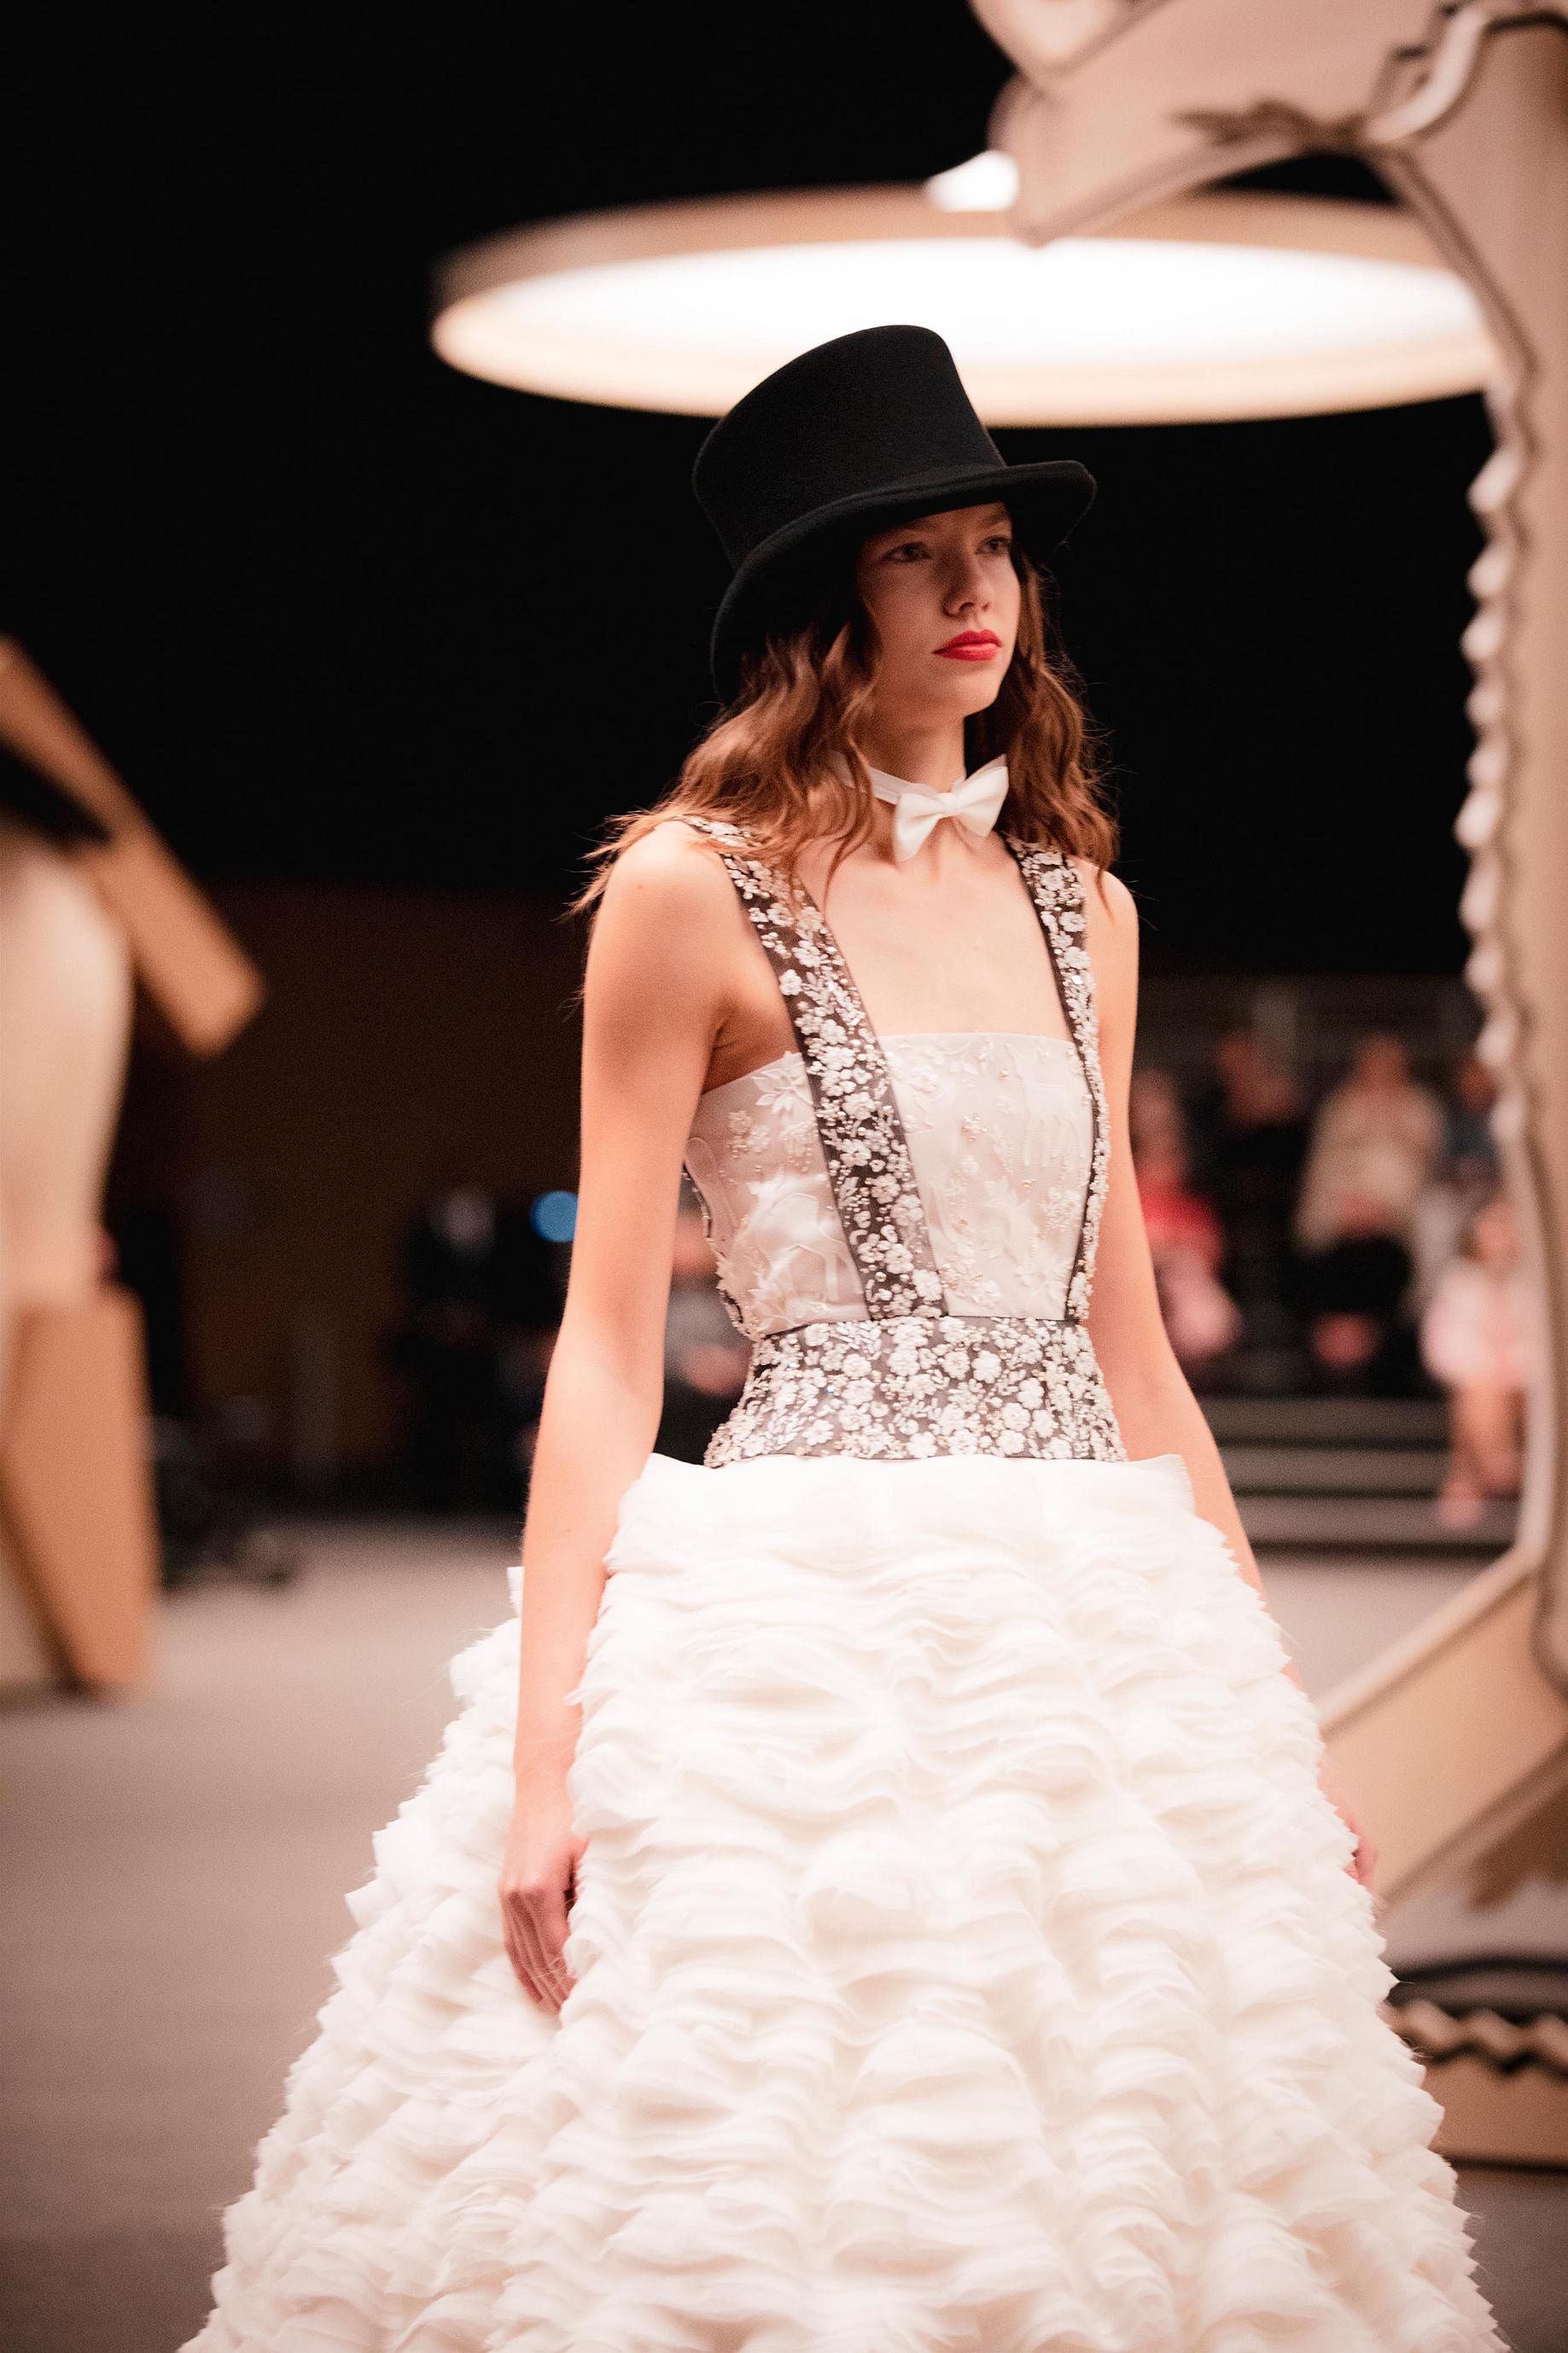 Chanel's haute couture collection debuts in Singapore